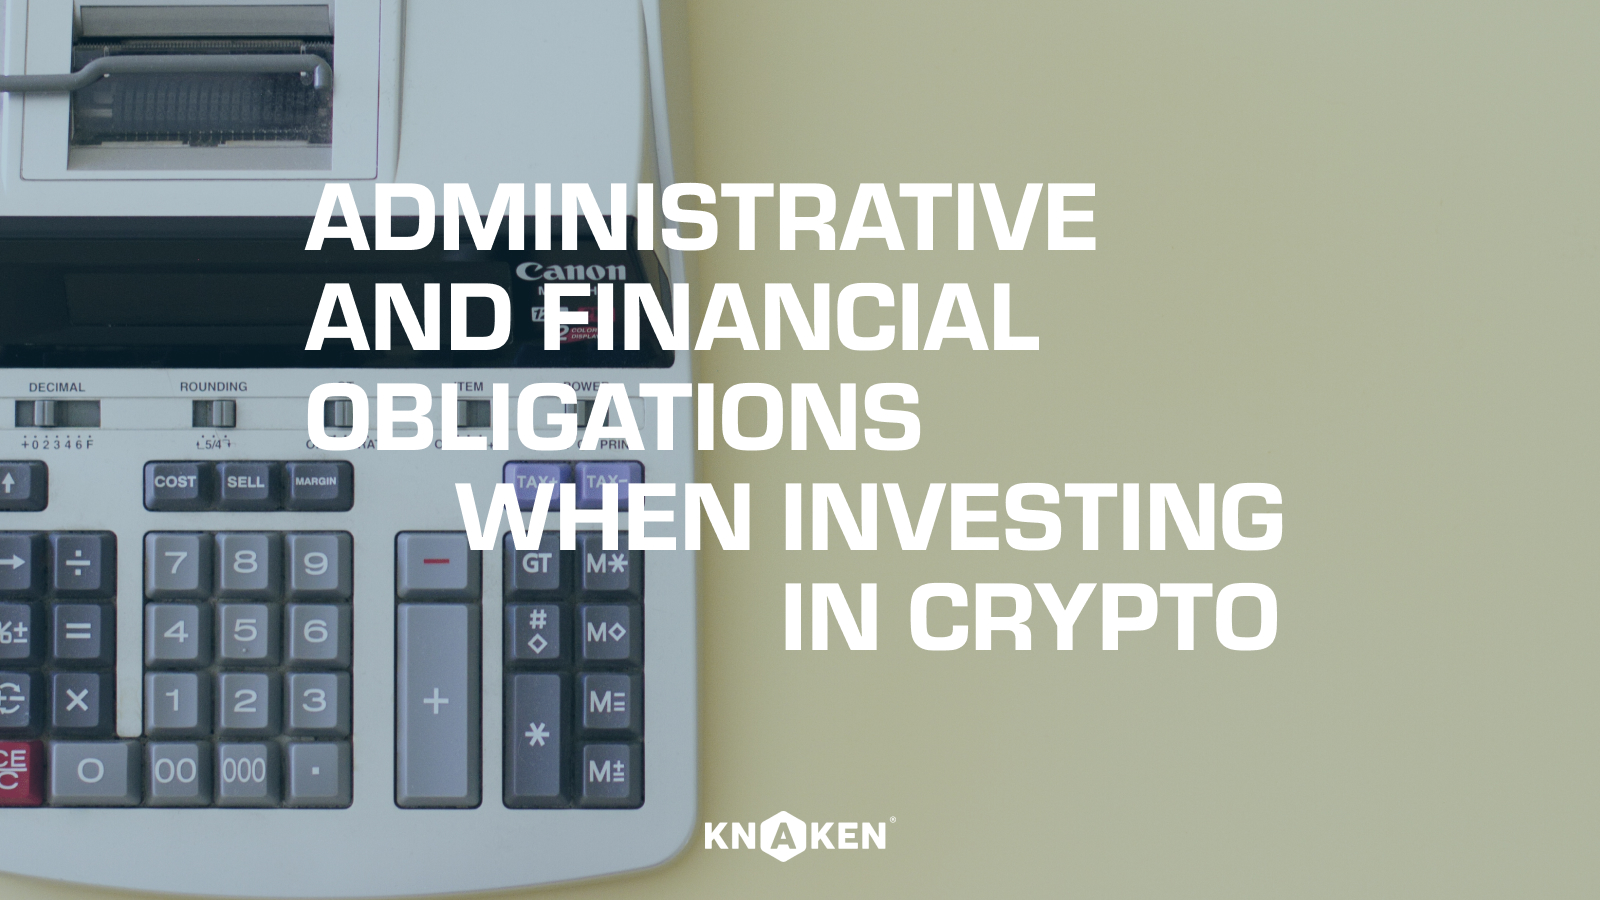 Administrative and financial obligations when investing in Crypto